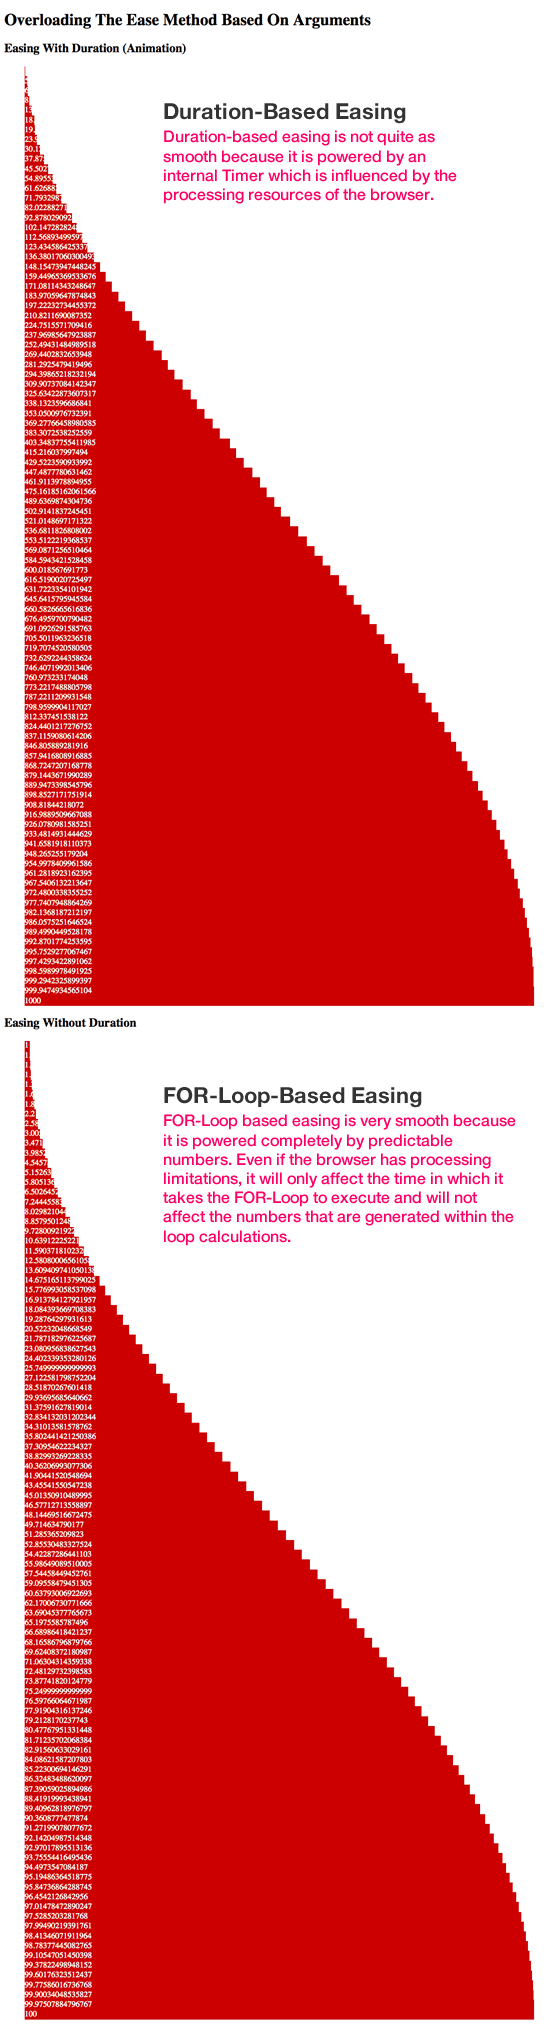 Duration And Non-Duration Based Easing Using jQuery's Animate() Method And FOR-Loops.